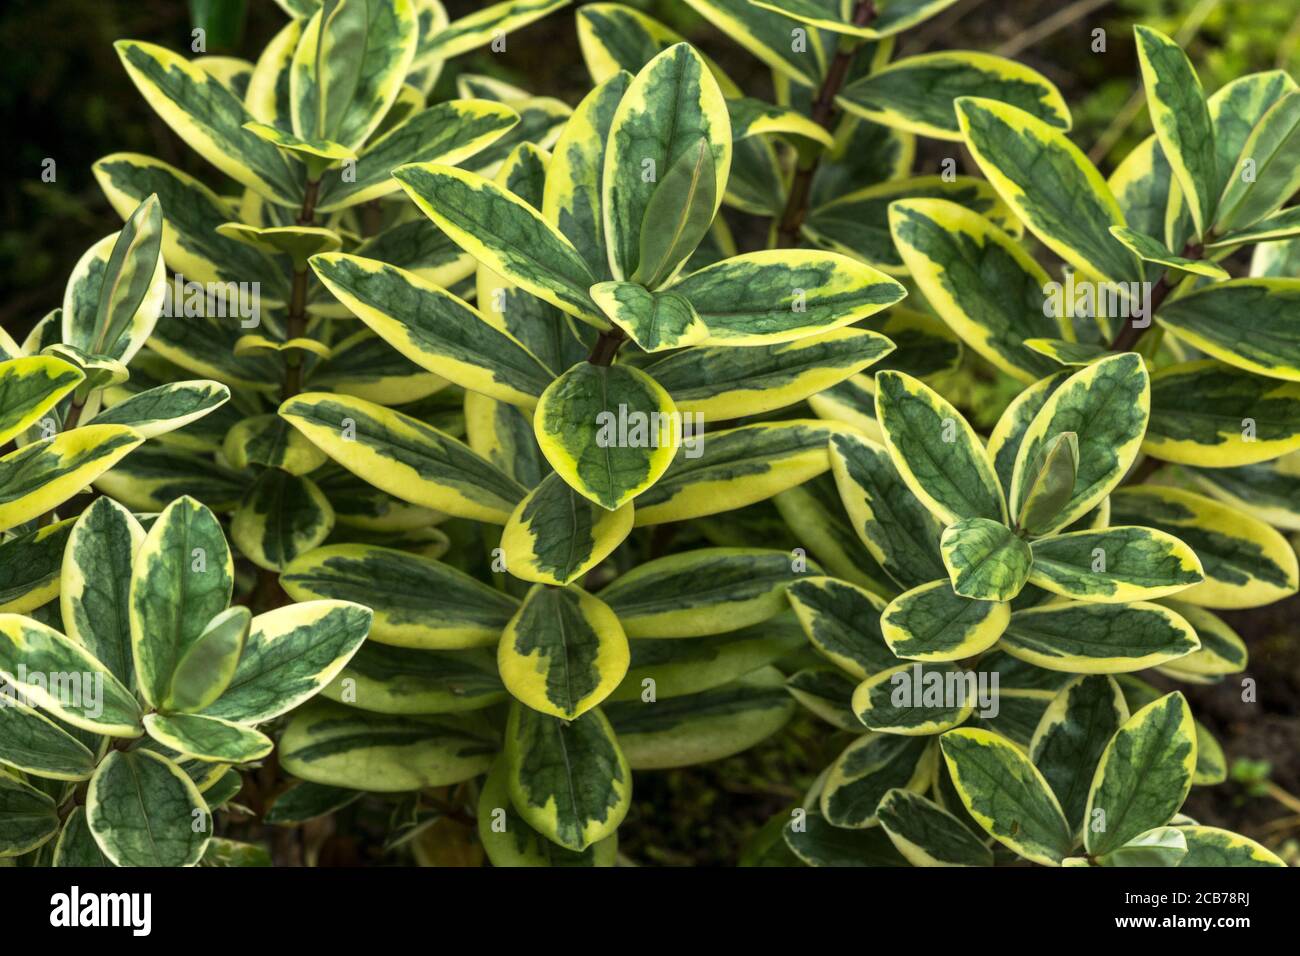 Hebe x franciscana 'Latifolia variegata'. an evergreen shrub that I have found difficult to grow.South-west France. Stock Photo